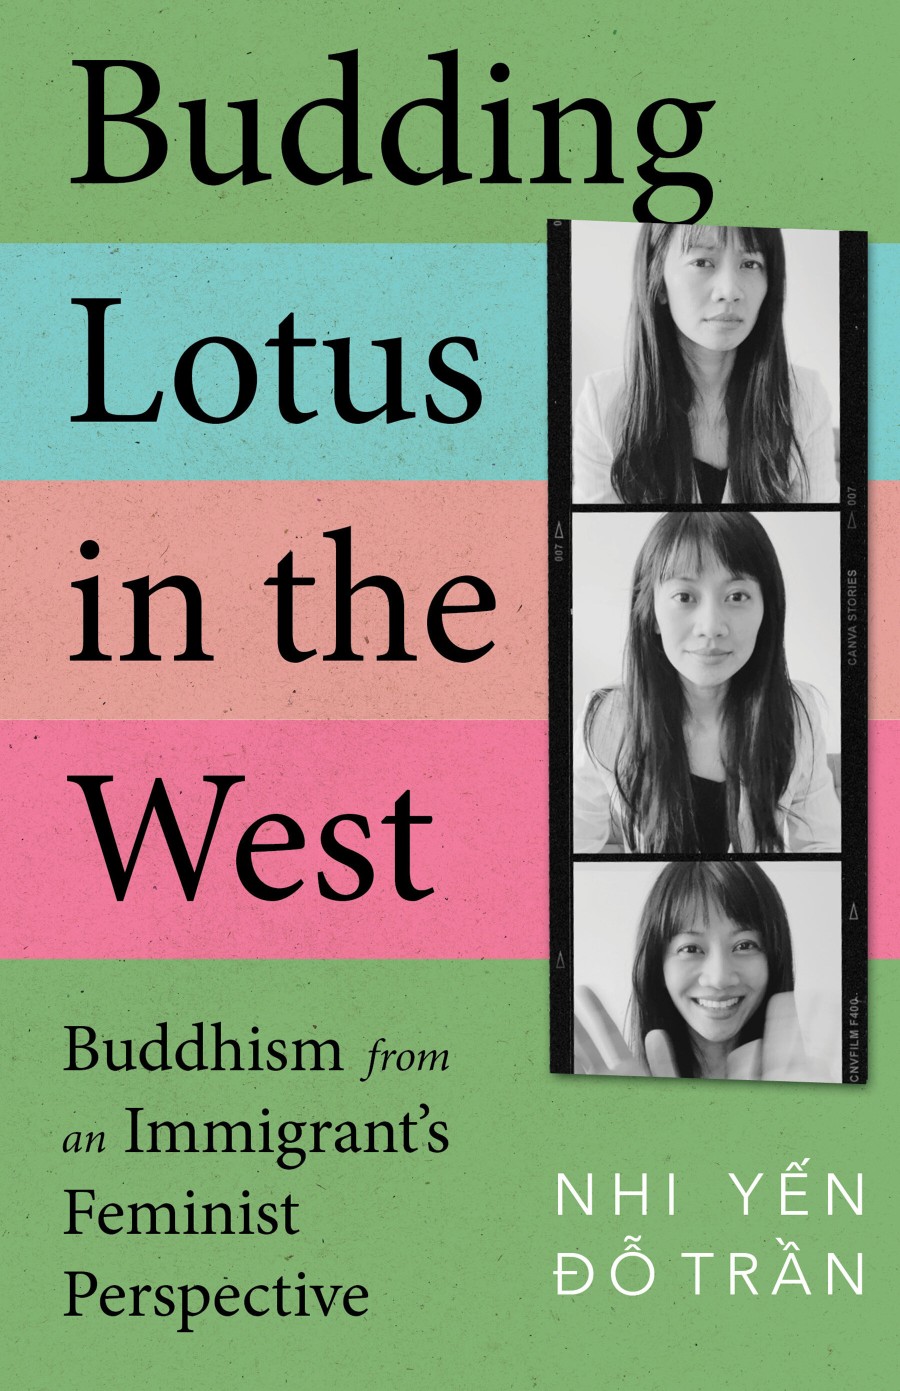 lotus in the west